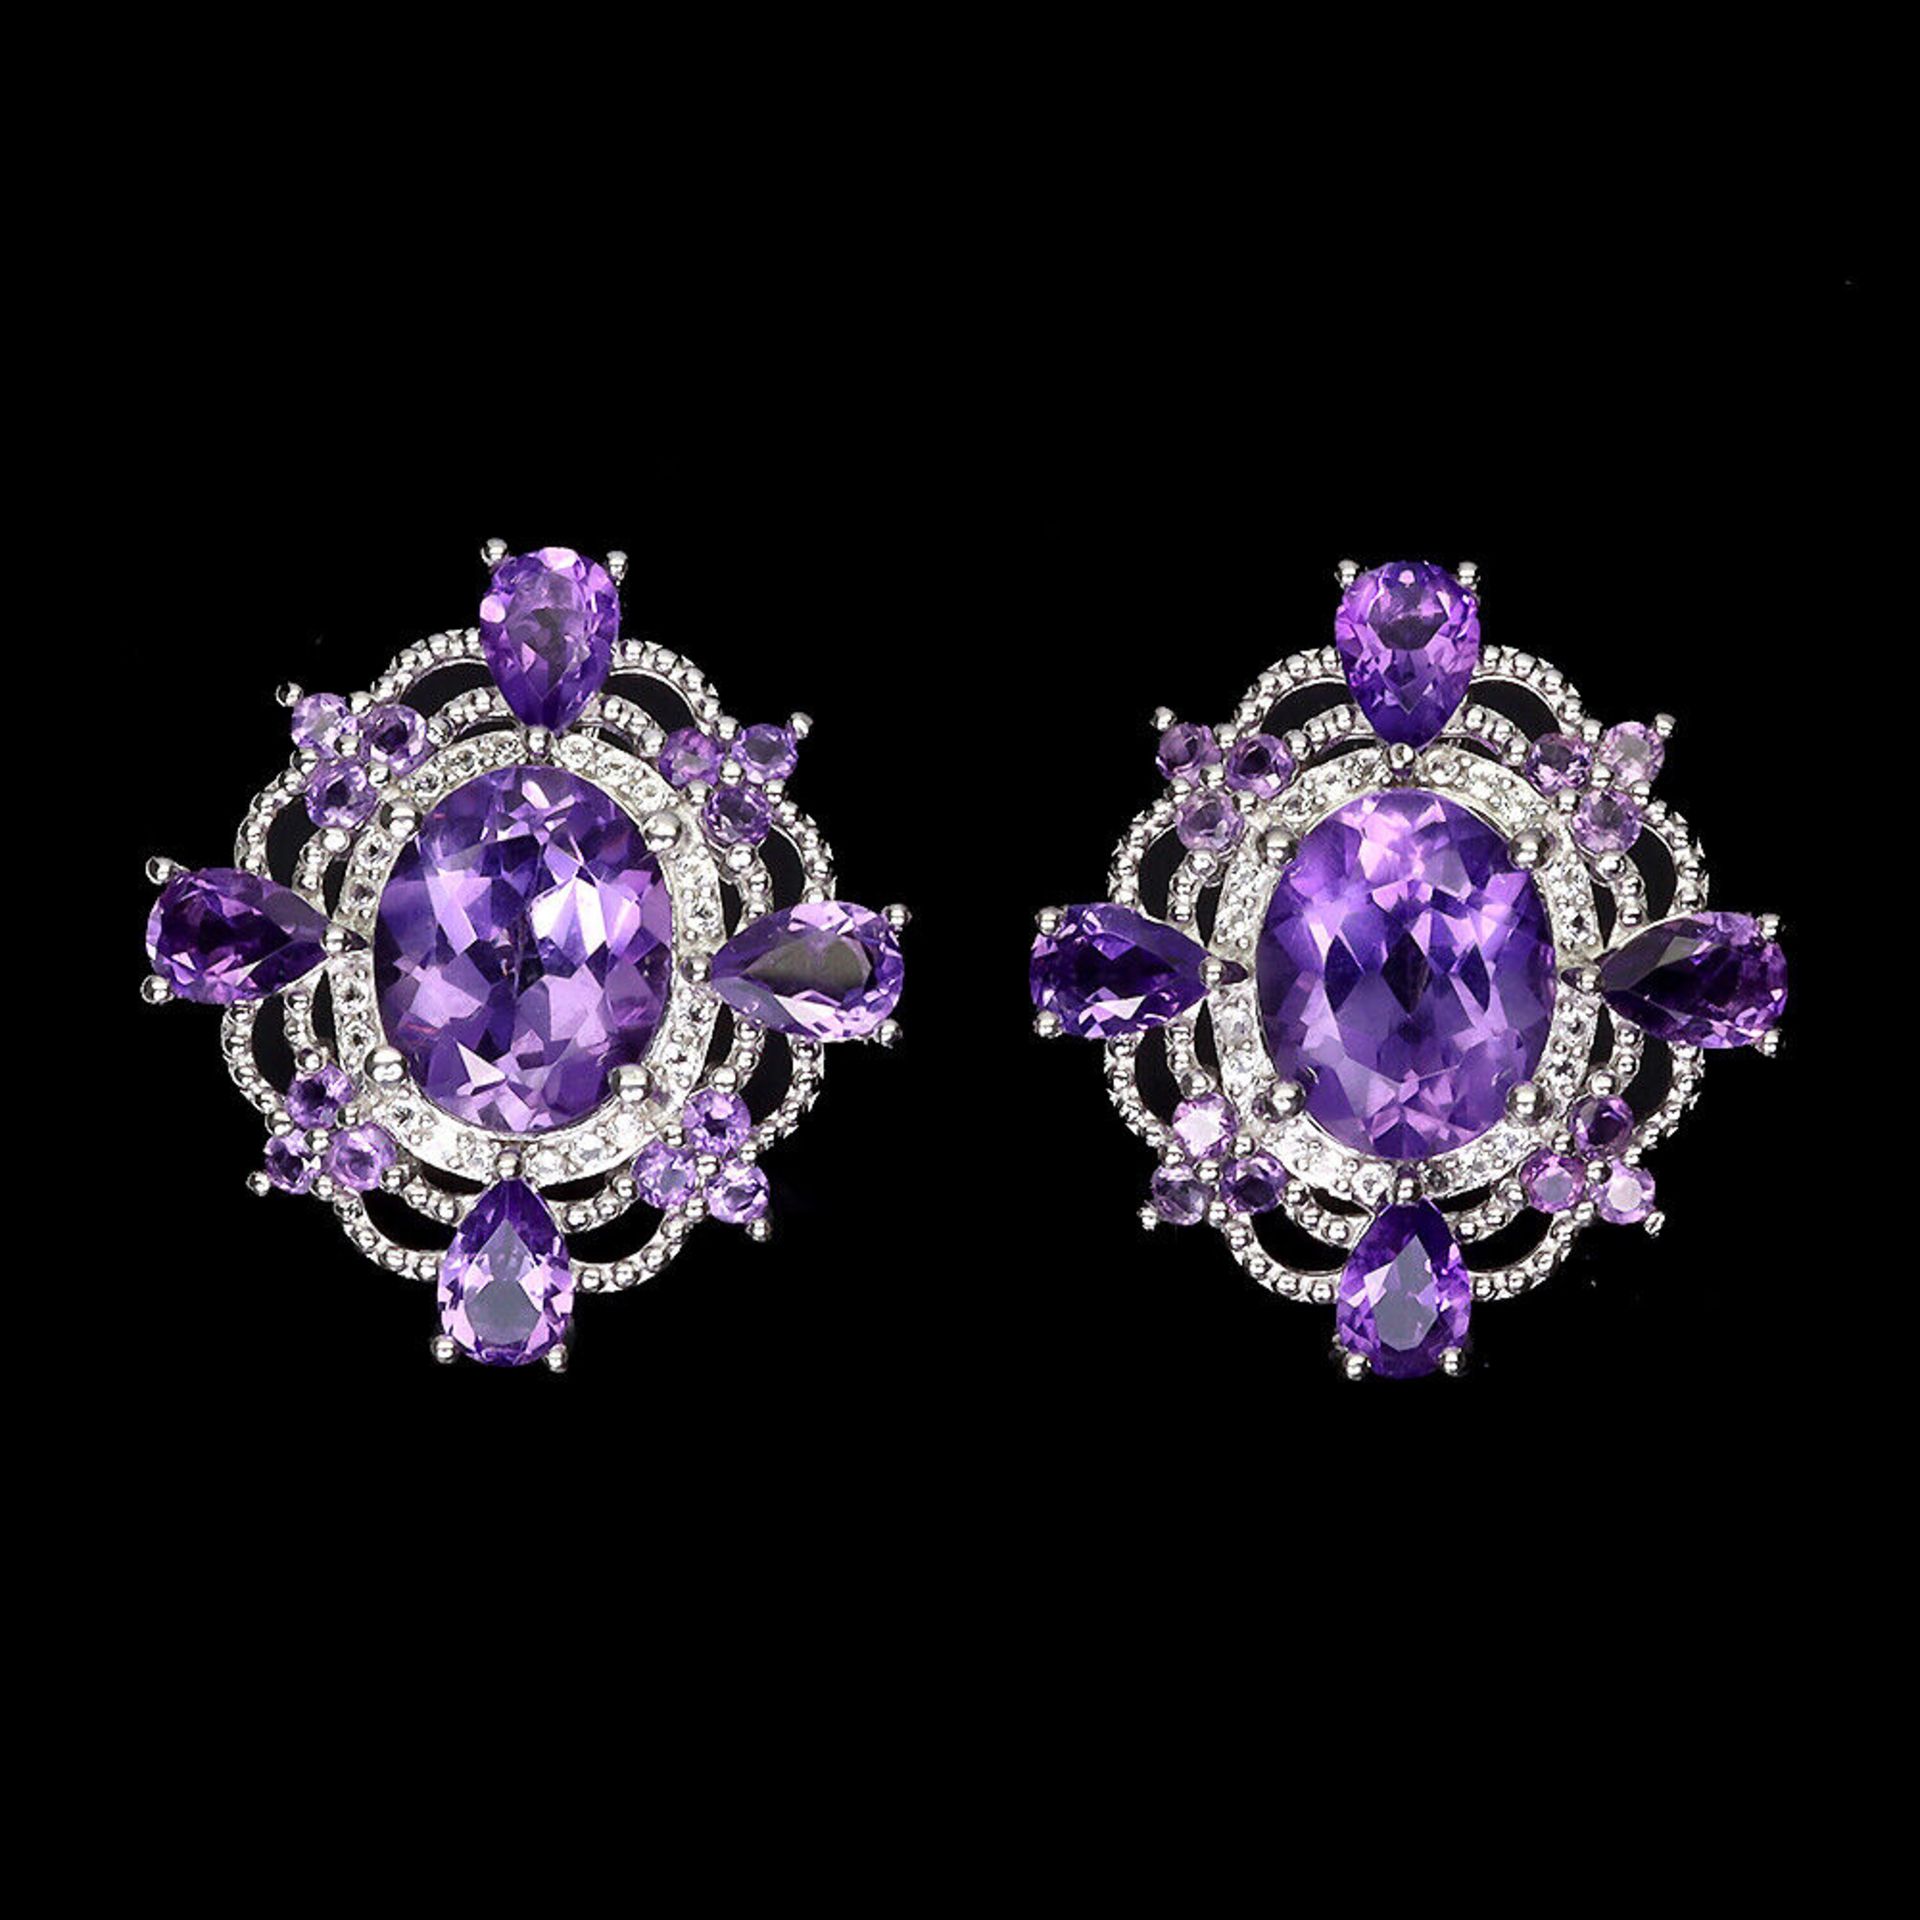 A pair of 925 silver earrings set with oval cut amethysts and white stones, L. 2.4cm.